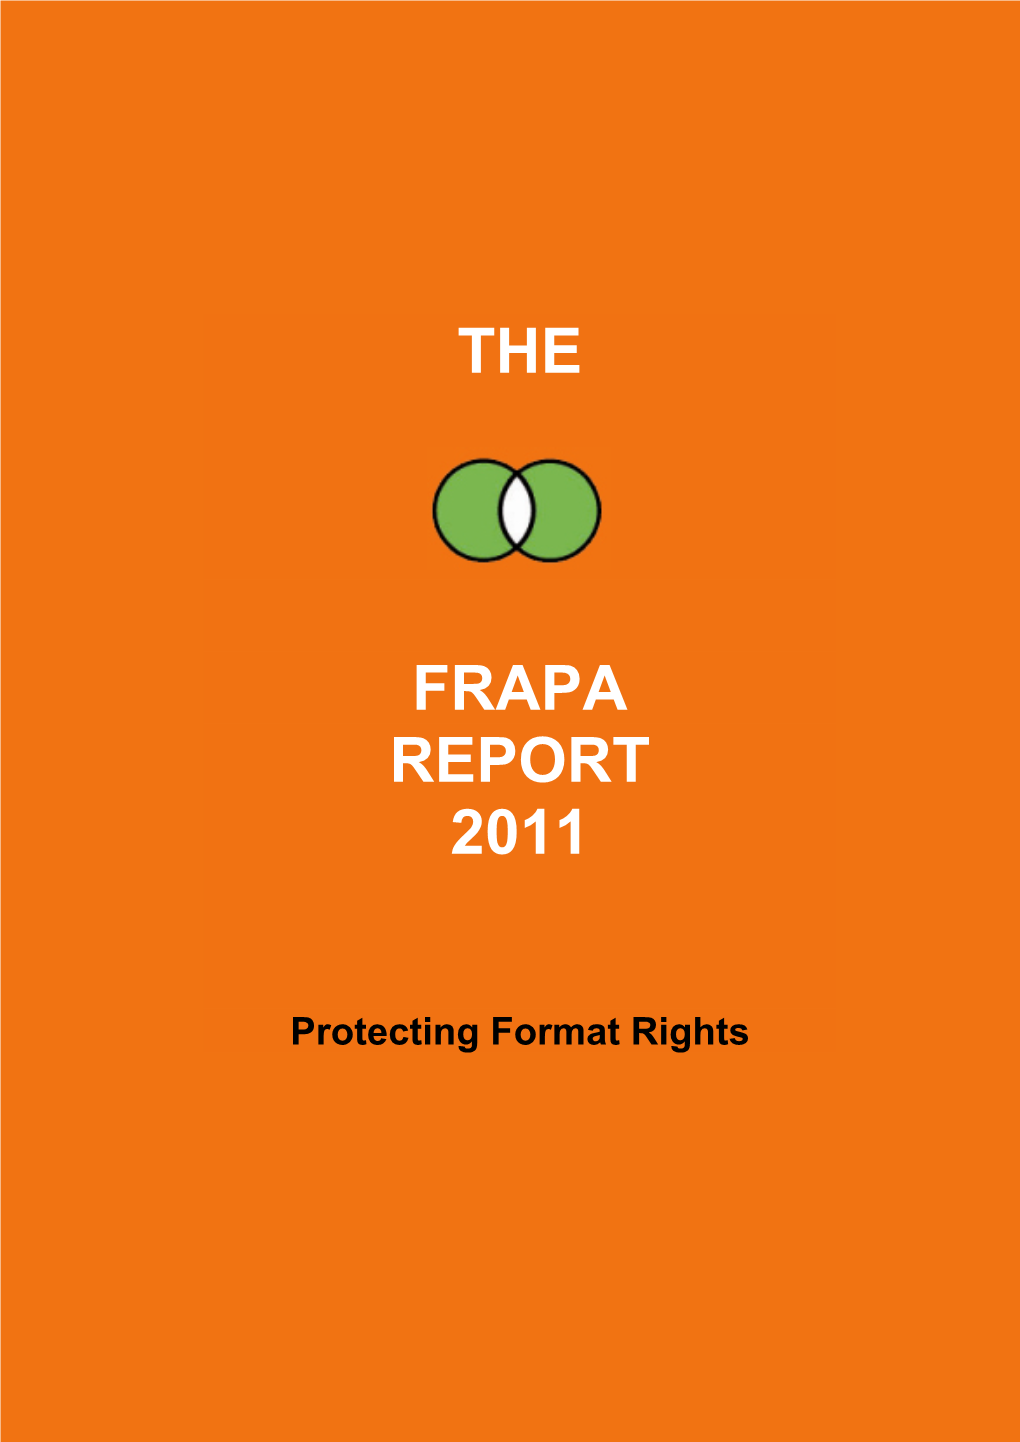 The Frapa Report 2011